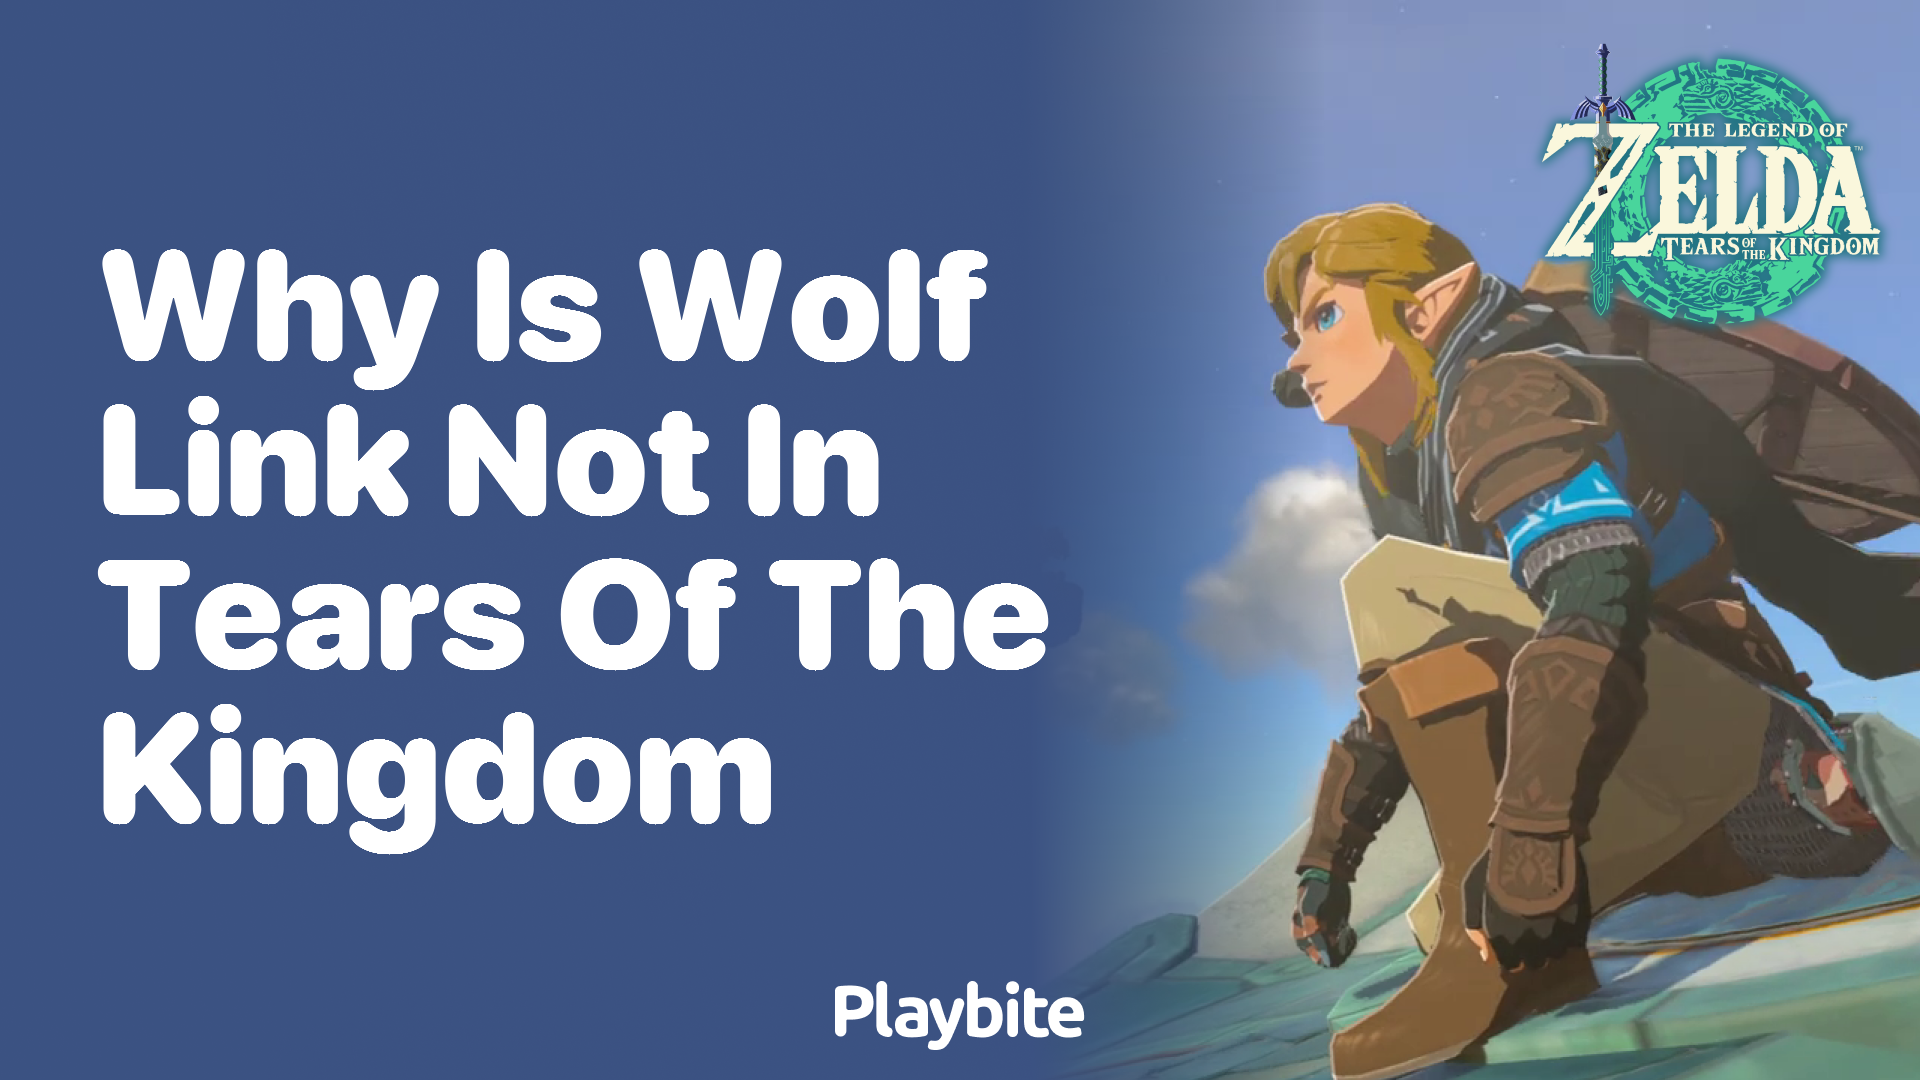 Why Is Wolf Link Not in Tears of the Kingdom?